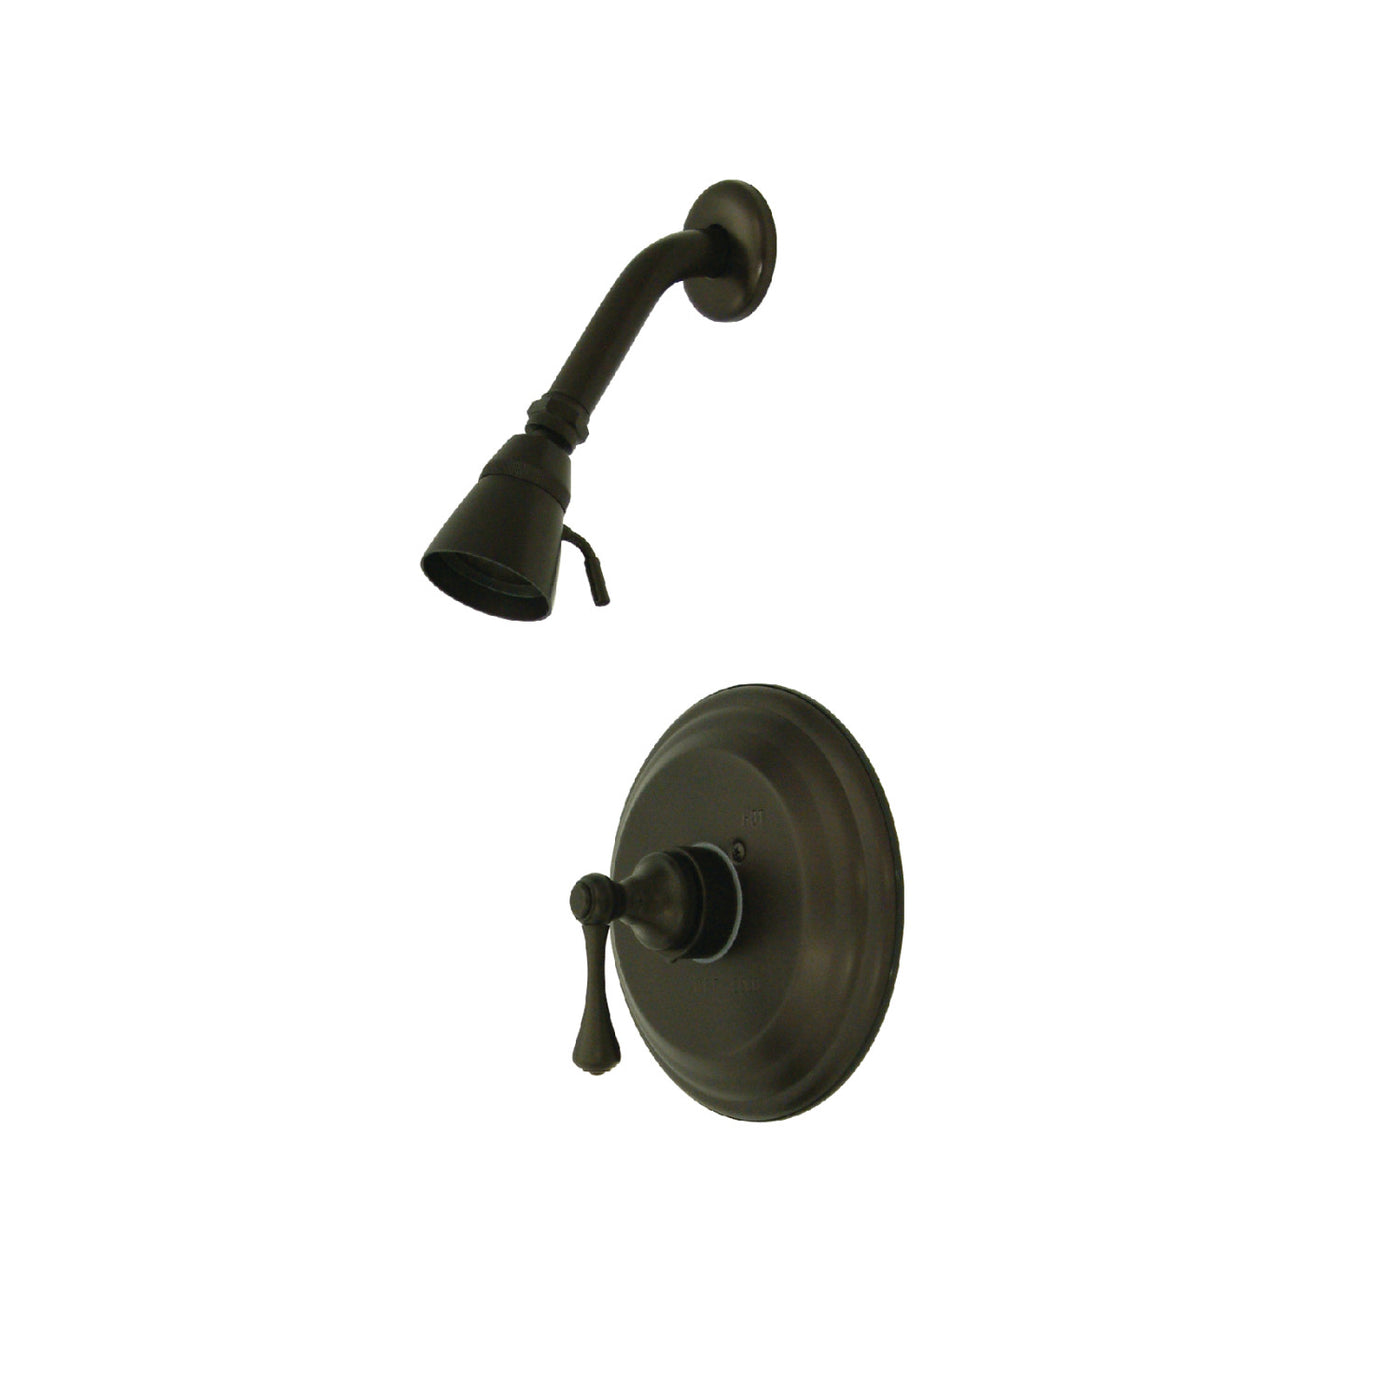 Elements of Design EB2635BLSO Shower Faucet, Oil Rubbed Bronze